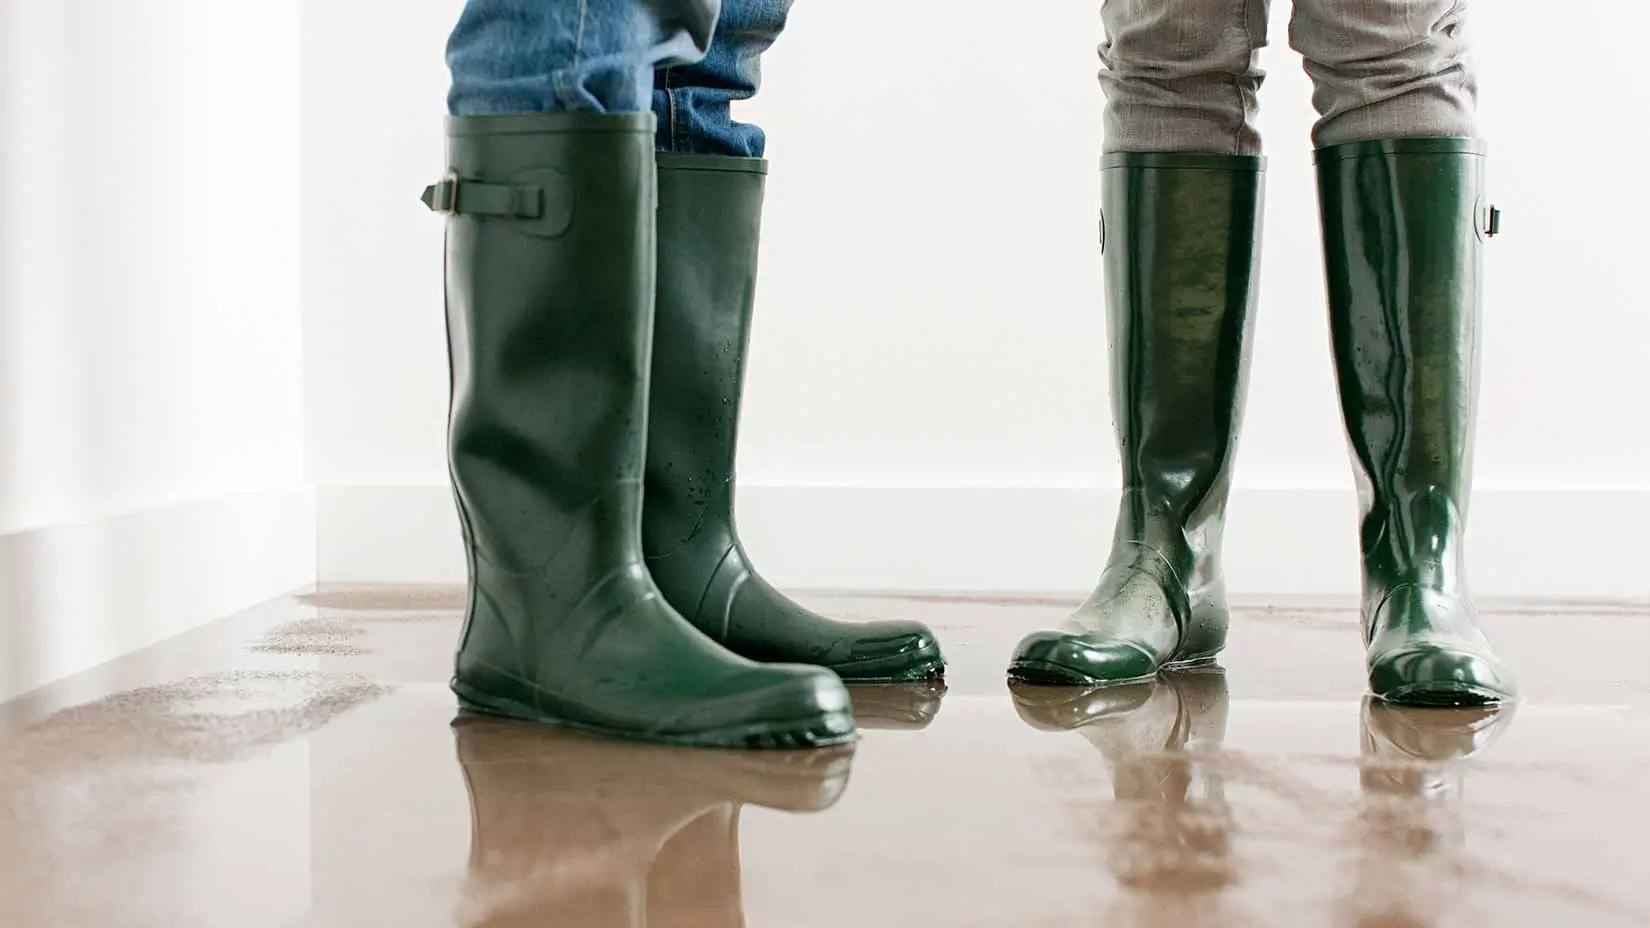 Two people wearing green rubber boots standing on a wet floor.